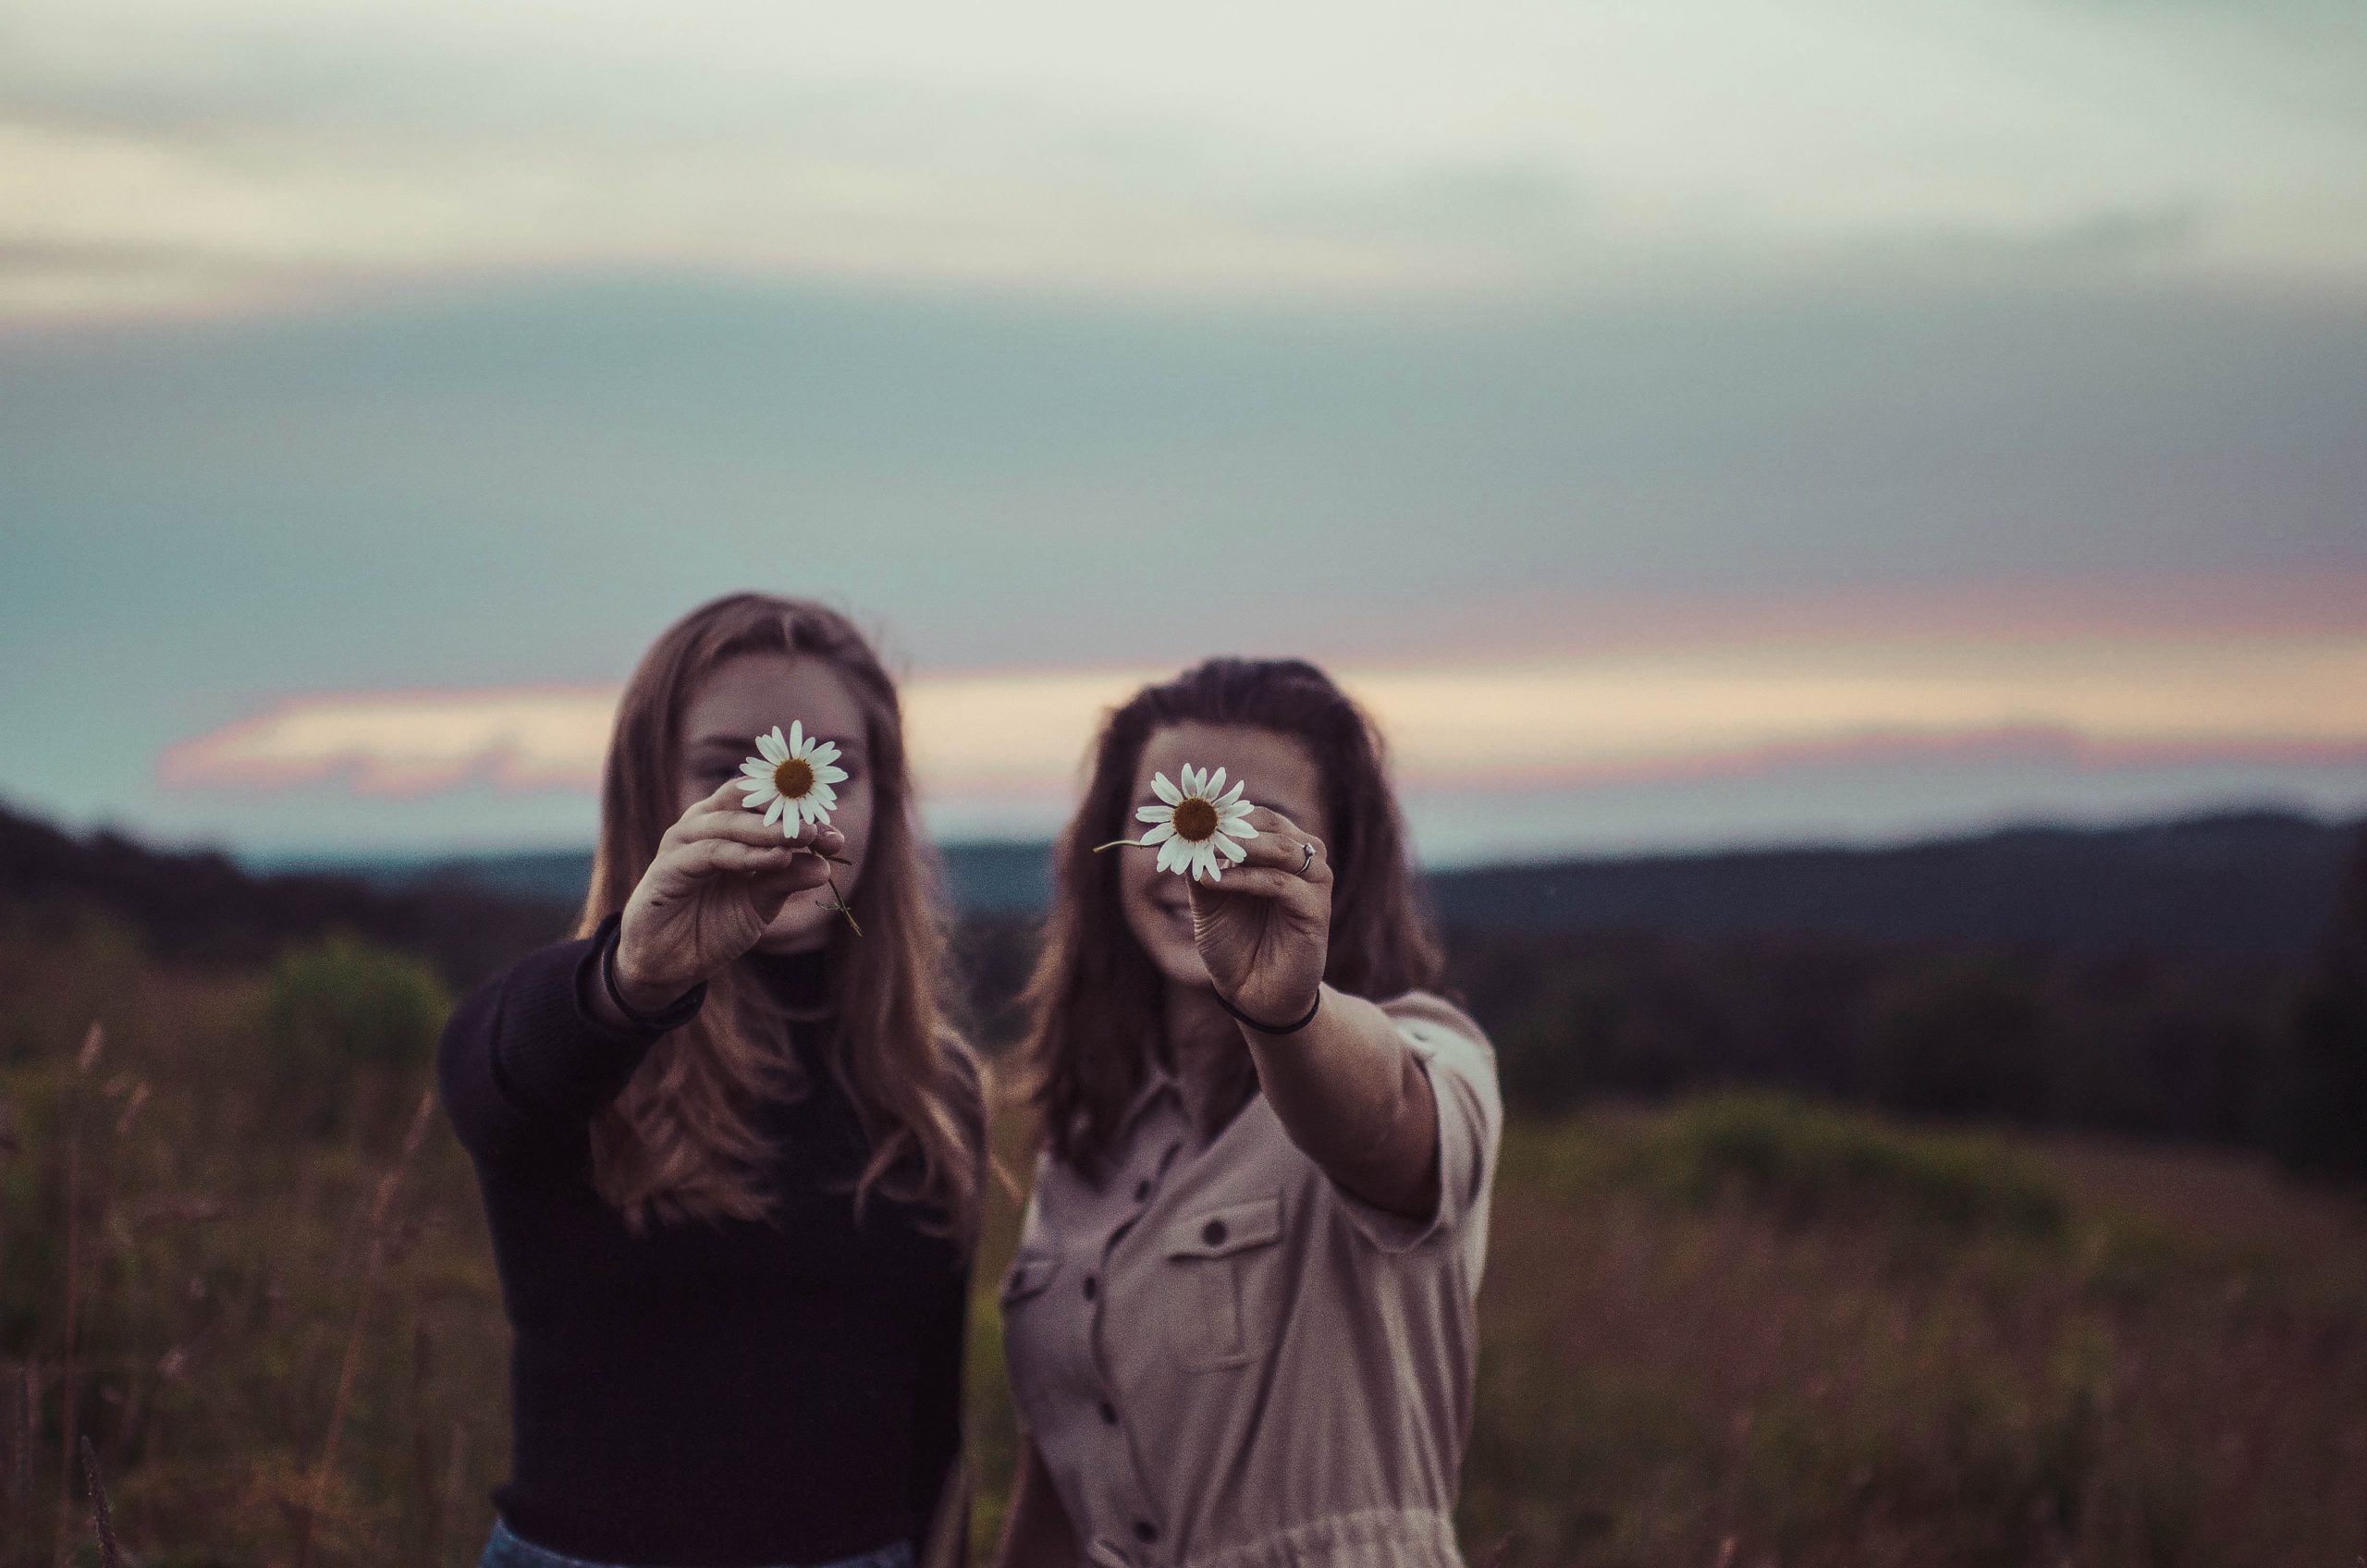 Two friends holding up wildflowers in front of their faces.